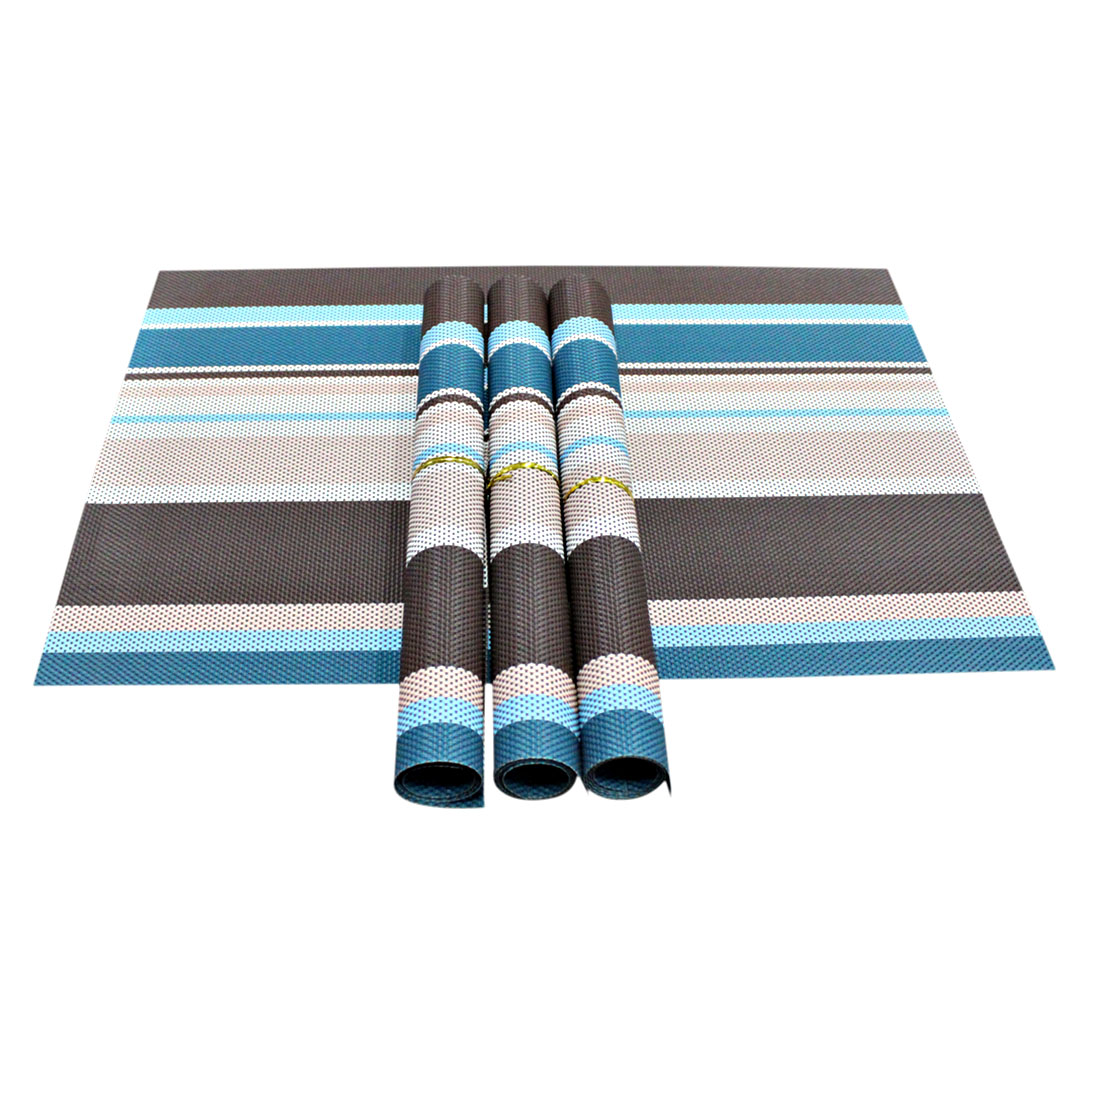 ORKA PVC Dining Table Placemat 4-Piece Set-Multicolor  